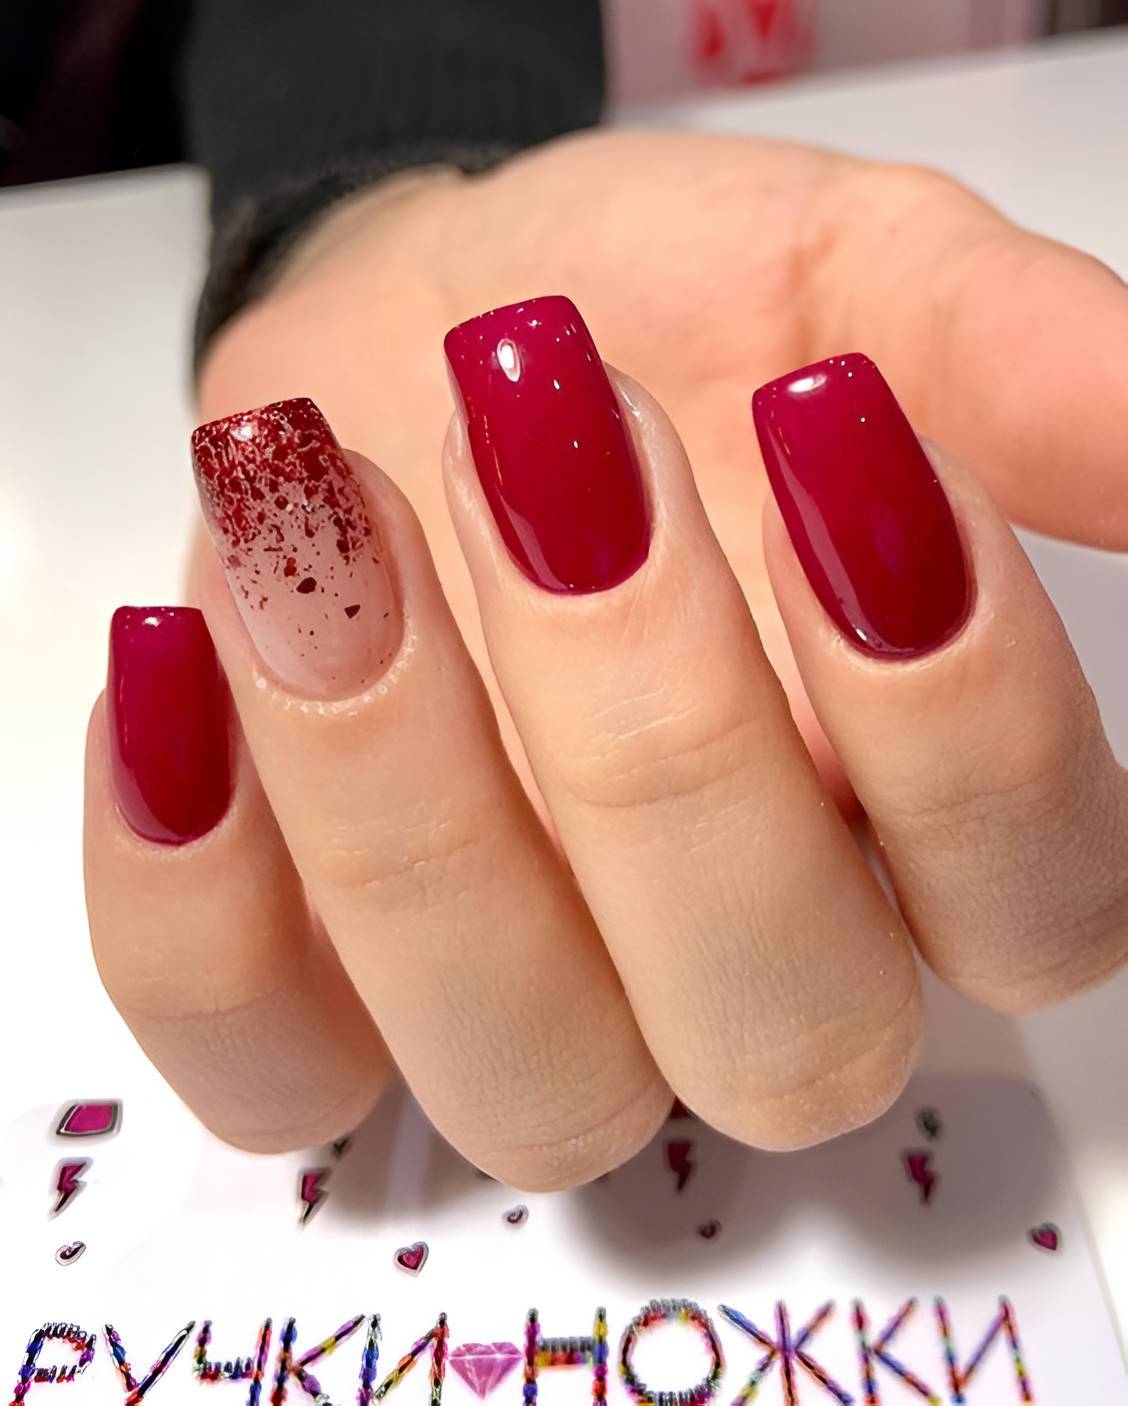 27 Glamorous Red Manicures To Make You Irresistible - 225